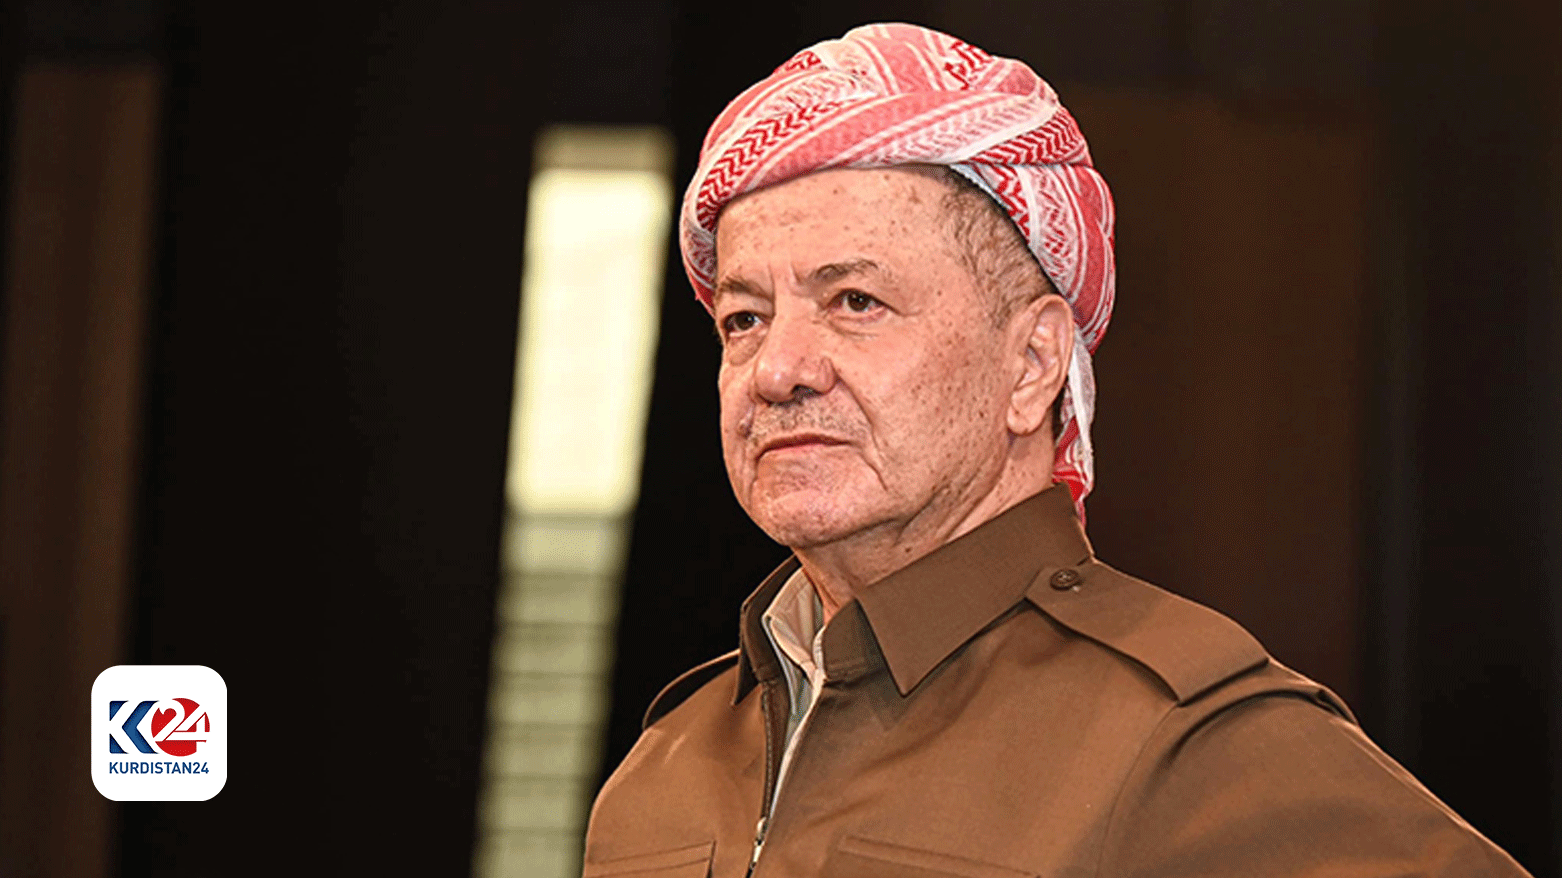 KDP President Masoud Barzani expressed condemnation for the recent terrorist attack in Moscow. (Photo: Kurdistan 24)